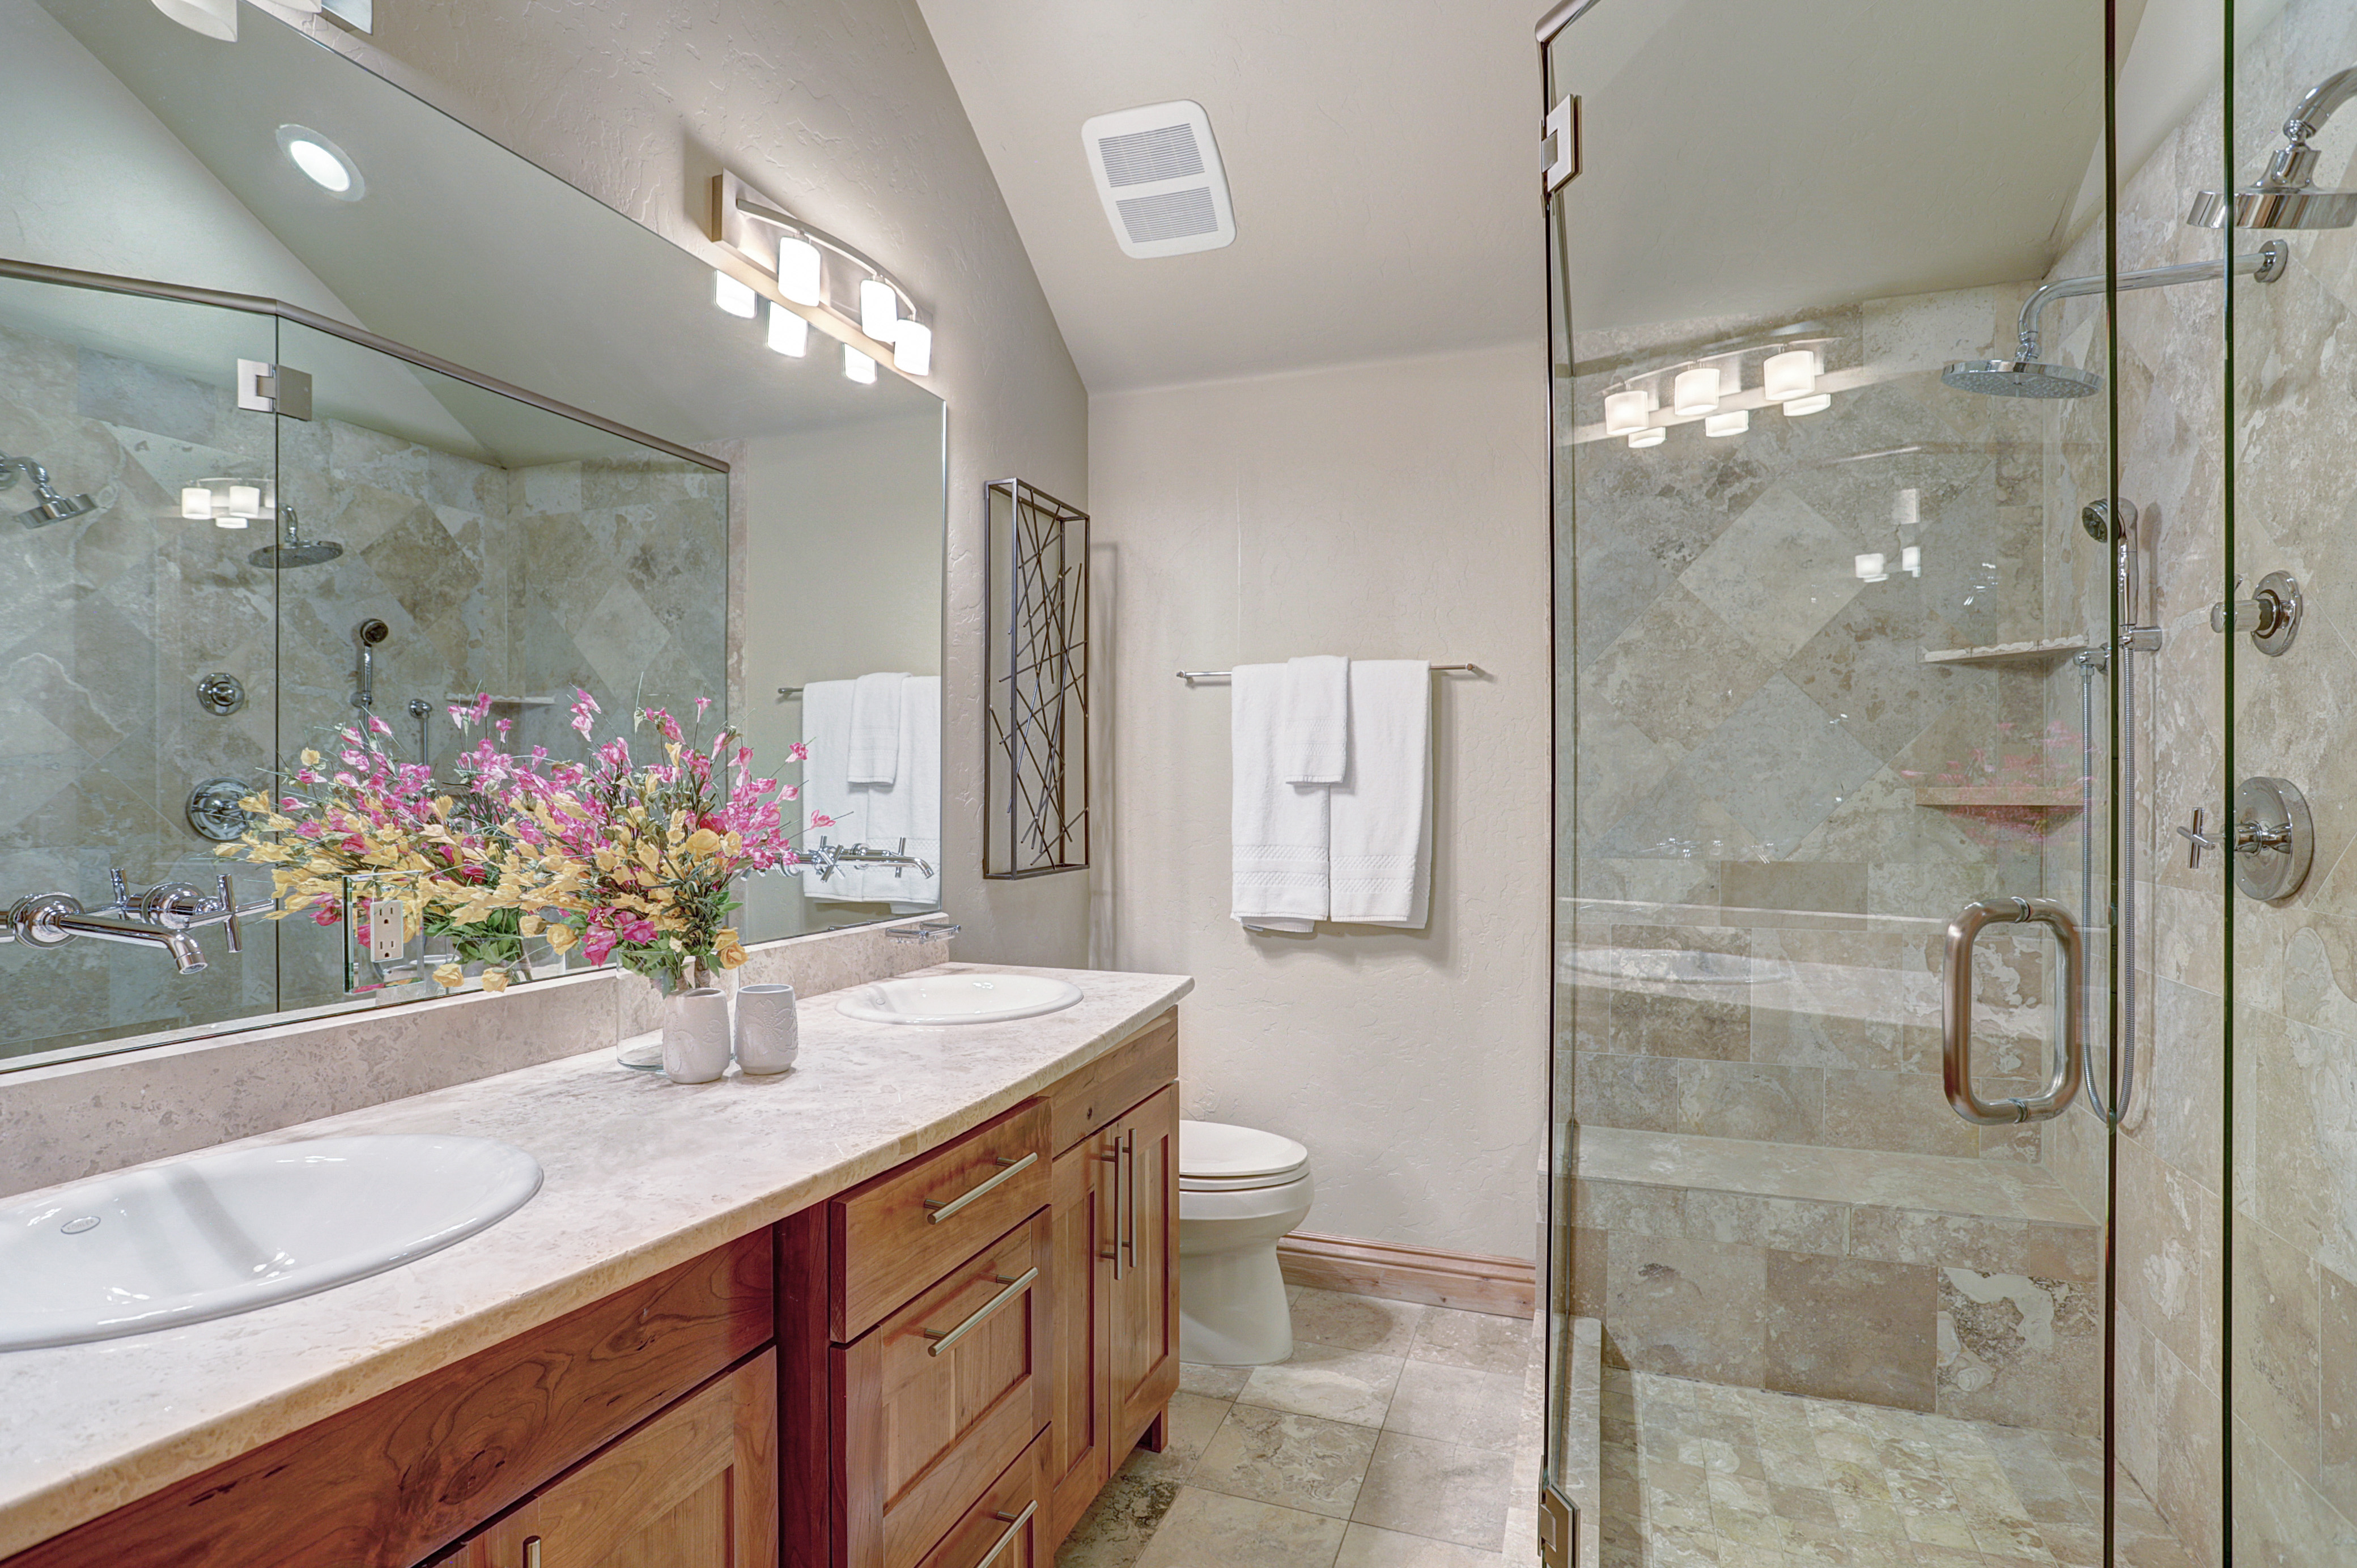 Master private bathroom with walk-in double shower head and 2 sinks